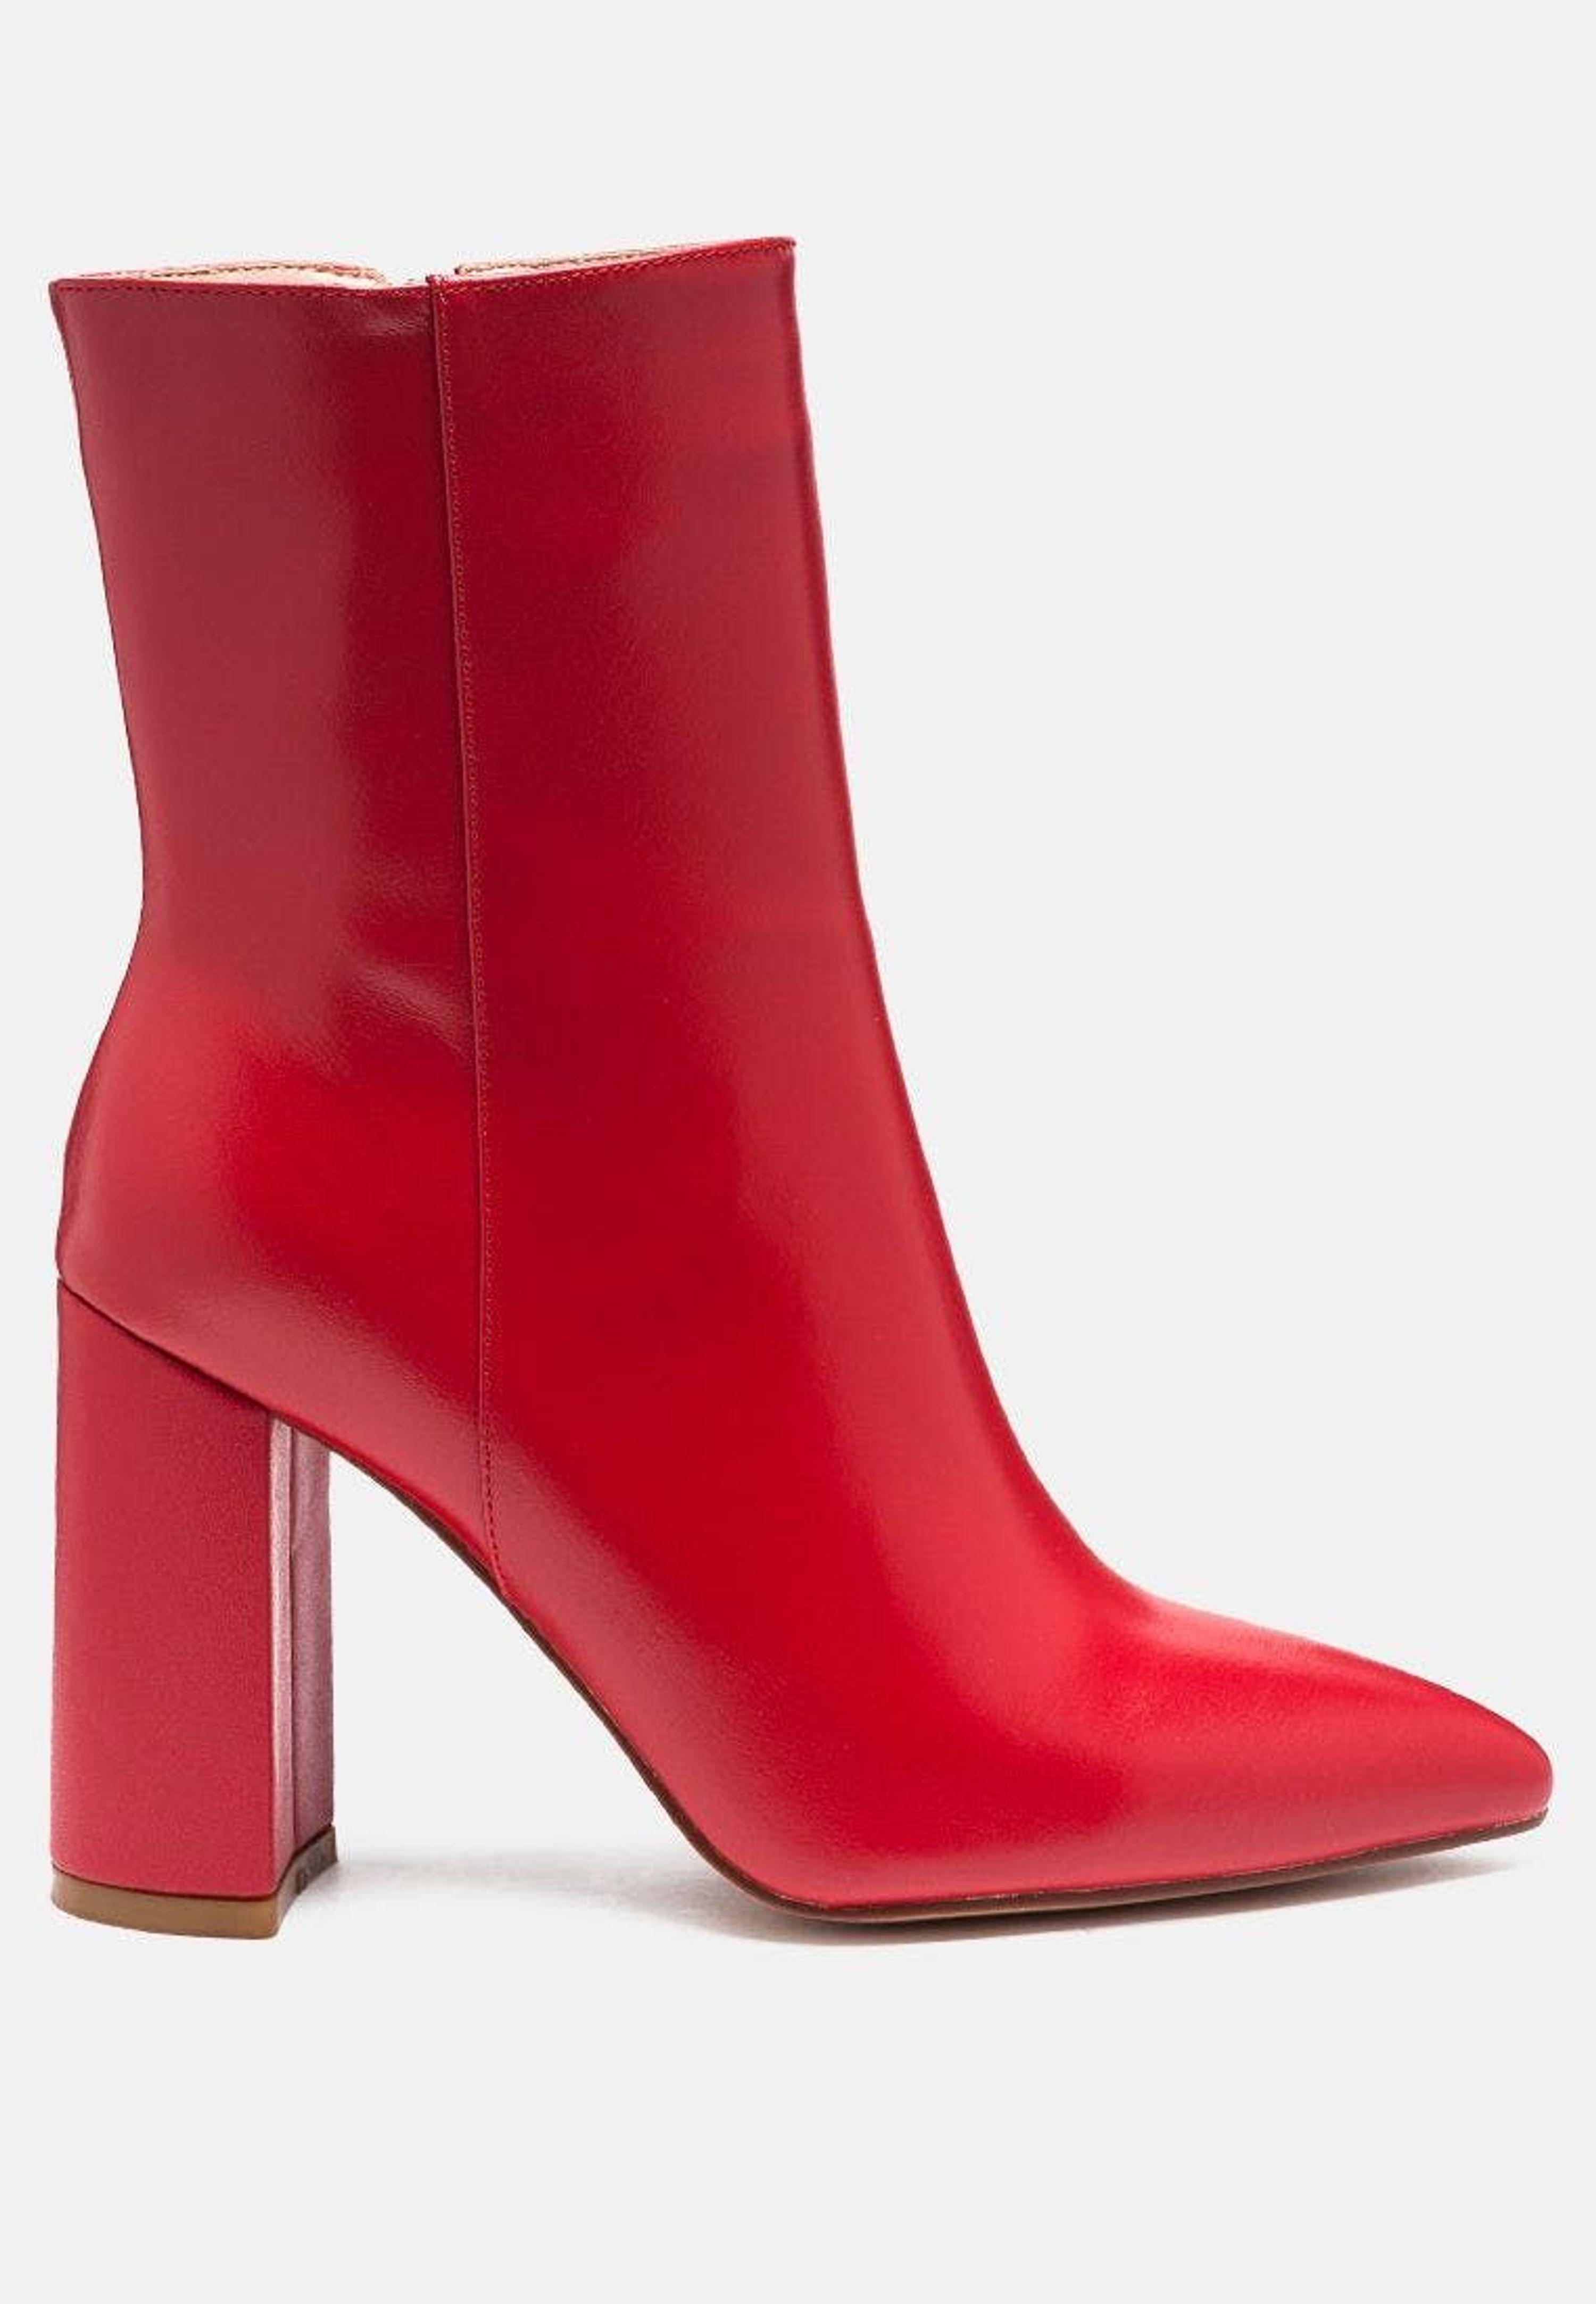 Rag & Co Margen Ankle High Pointed Toe Block Heeled Boot in Red | Lyst